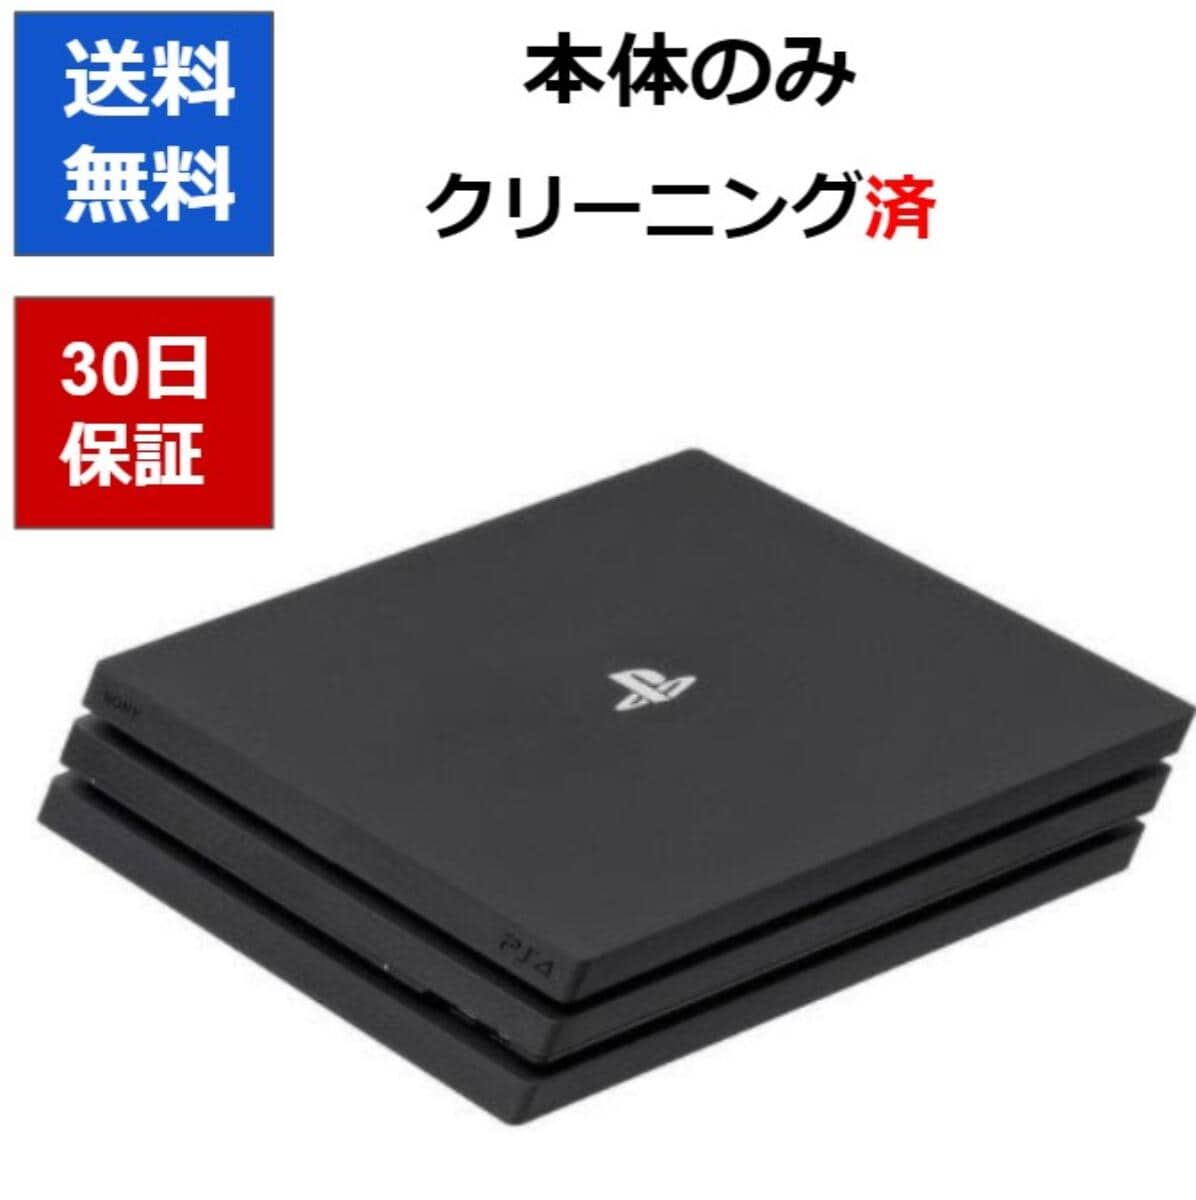 Used]Only as for PS4 PlayStation 4 Play Station 4 Black 2TB CUH-7200CB01 ,  it is PlayStation4 SONY SONY - BE FORWARD Store